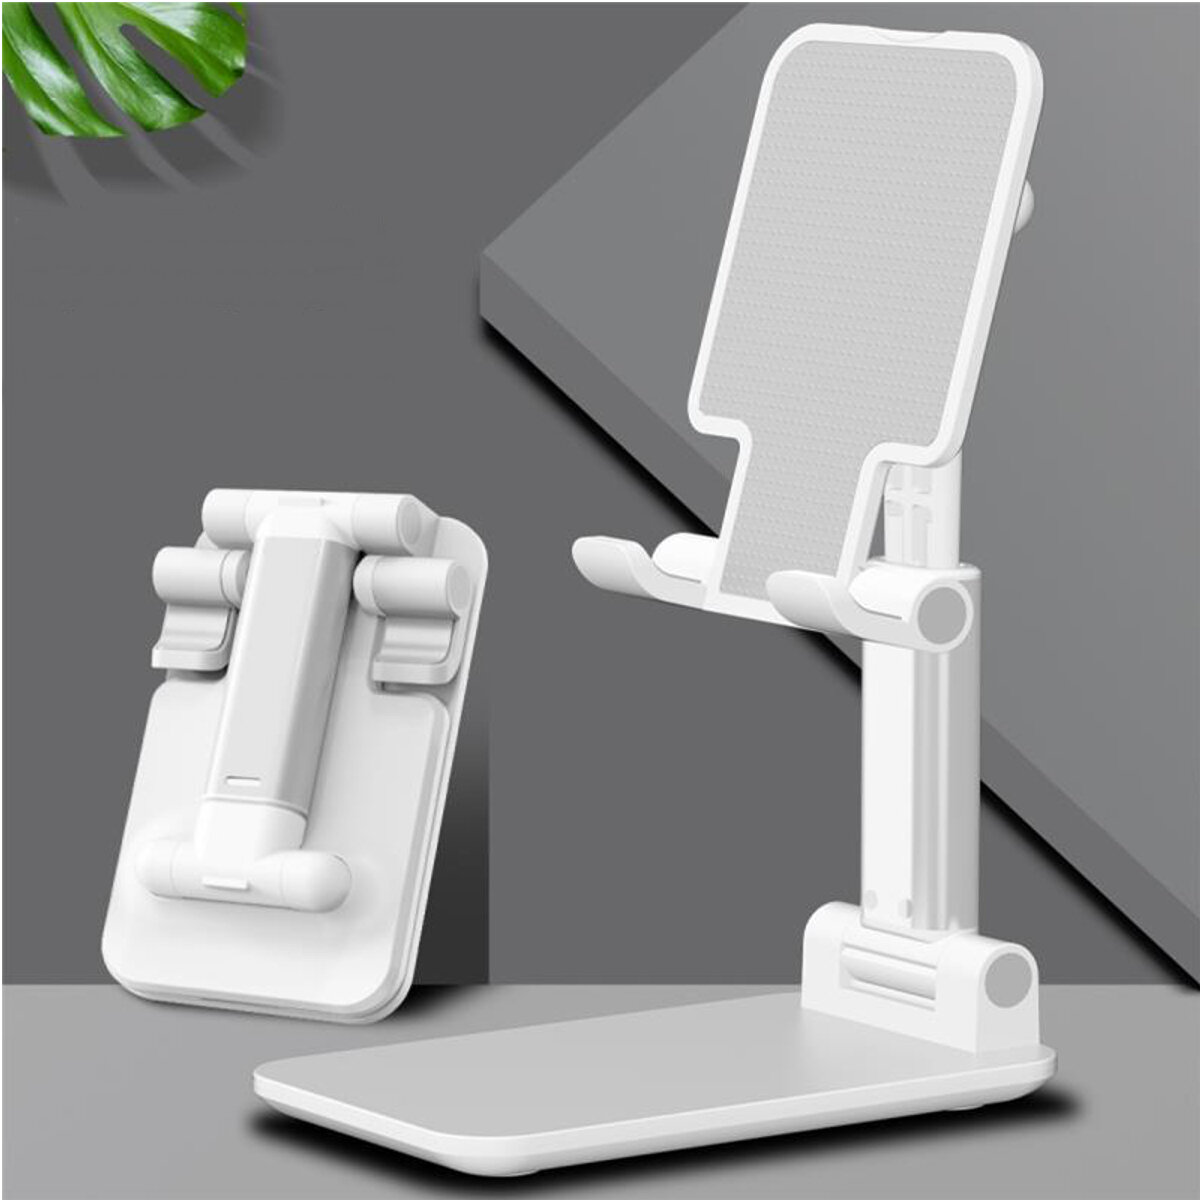 best price,cct4,universal,folding,telescopic,phone,tablet,holder,stand,discount